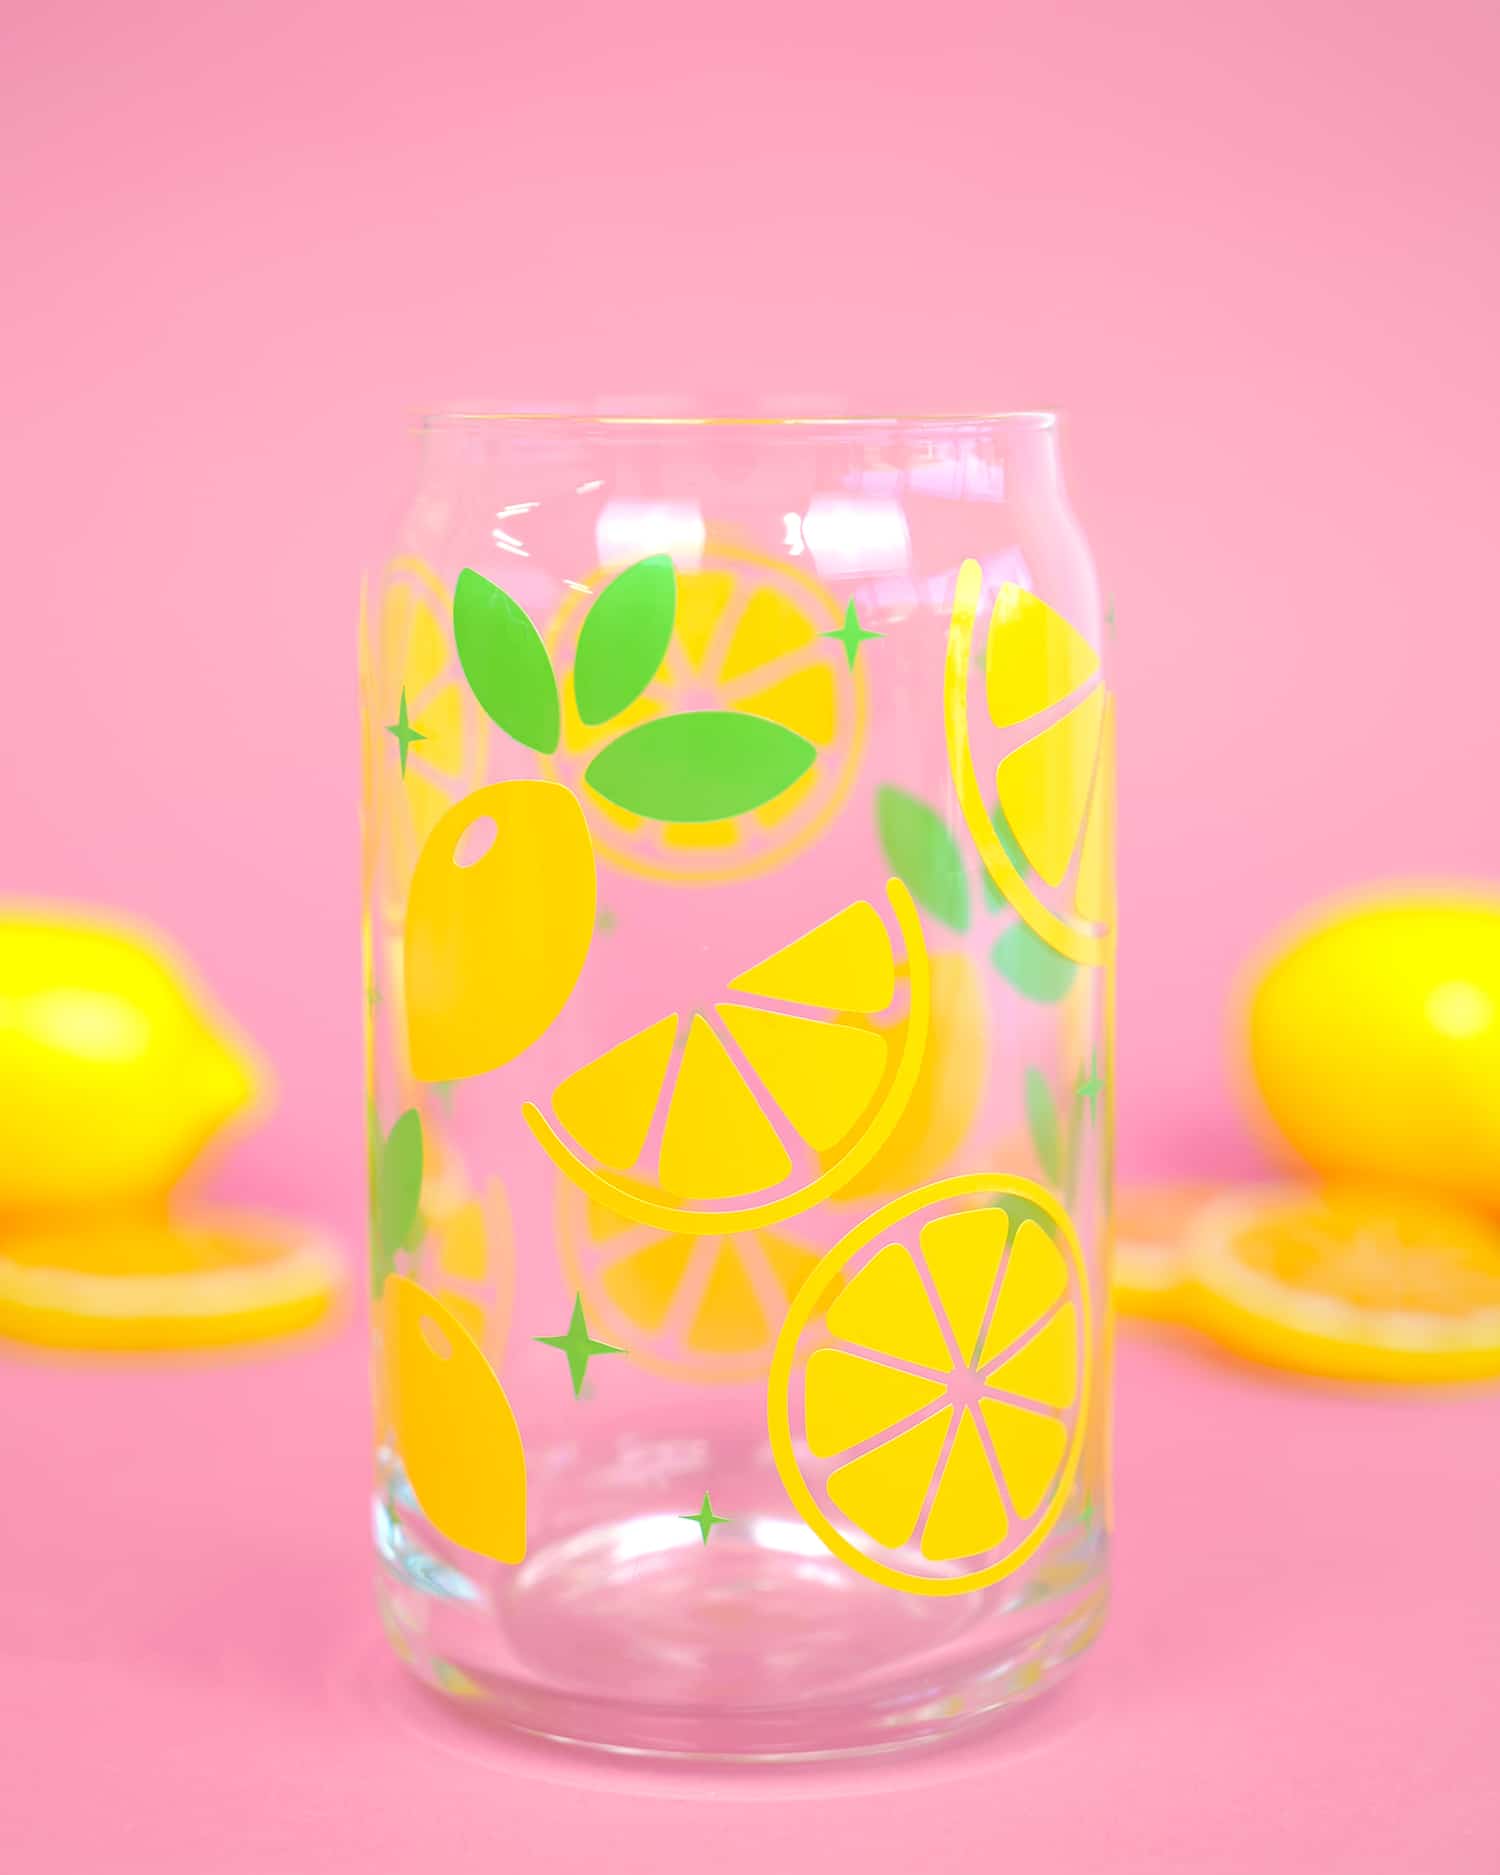 lemon slices on glass with pink bakground with lemon slices in background